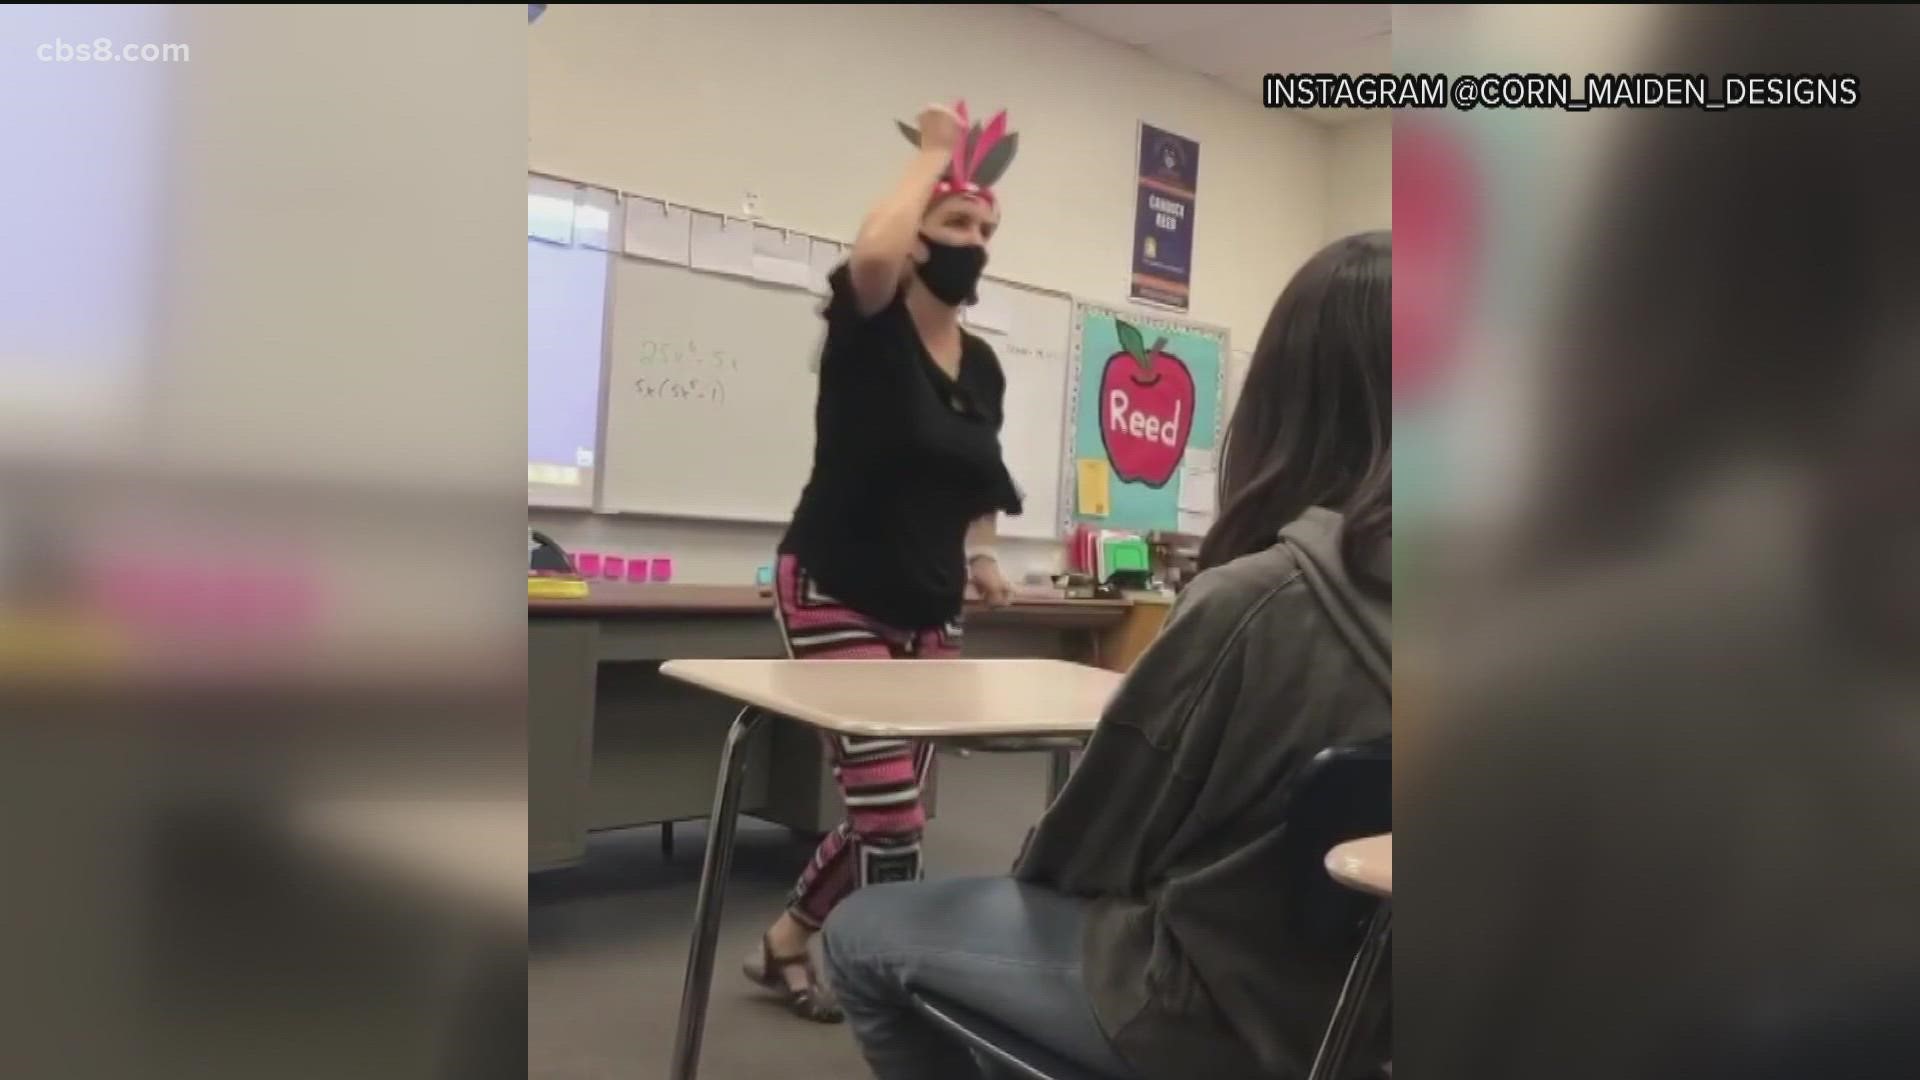 In a statement, the Riverside Unified School District called the teacher's "offensive depiction" of Native American culture "completely unacceptable."